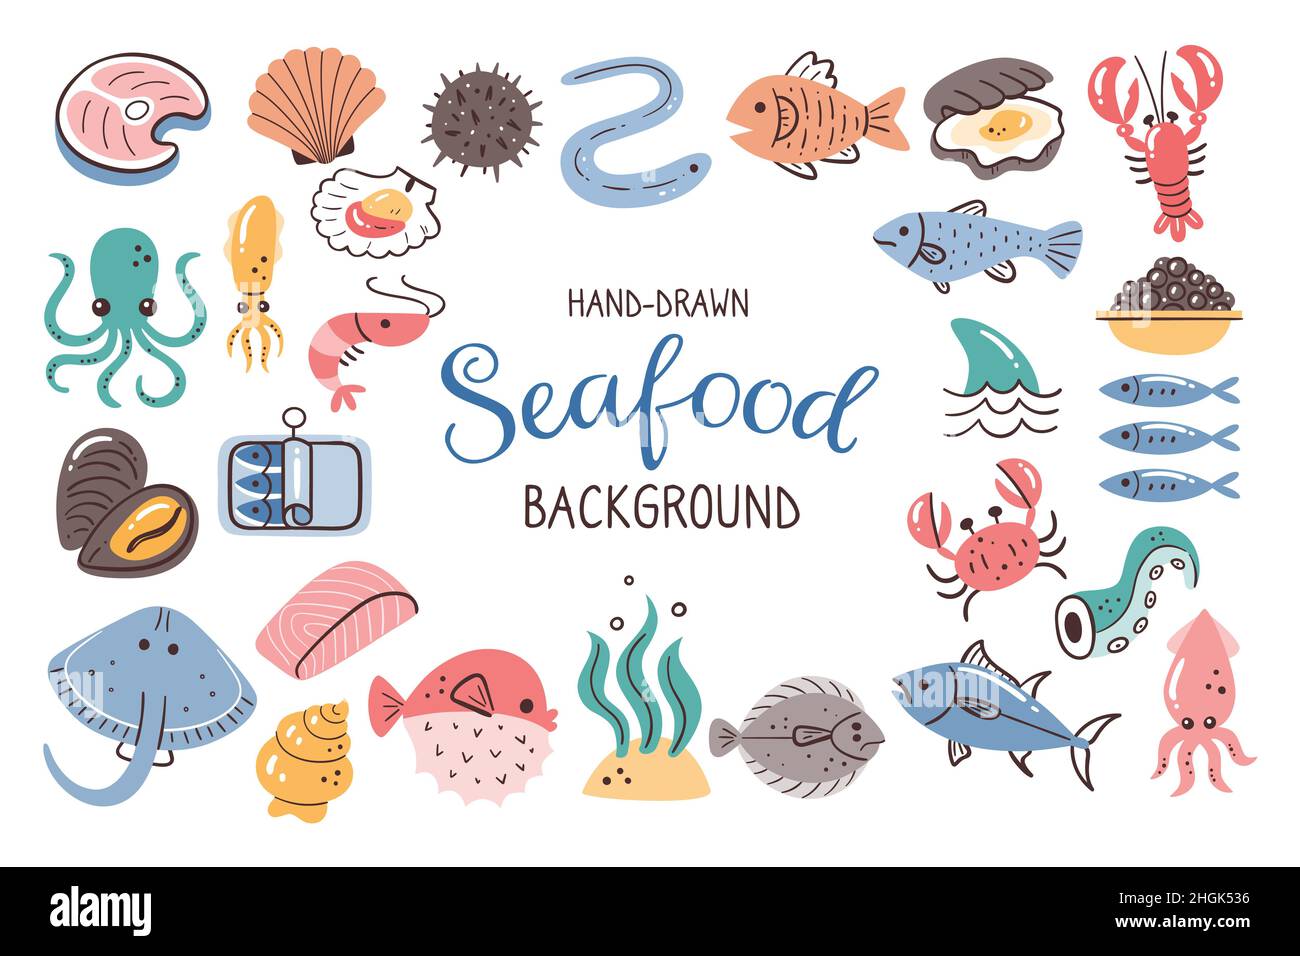 Seafood background. Fish, seaweed and shellfish. Food ingredients for cooking illustration. Isolated colorful hand-drawn icons on white background. Ve Stock Vector